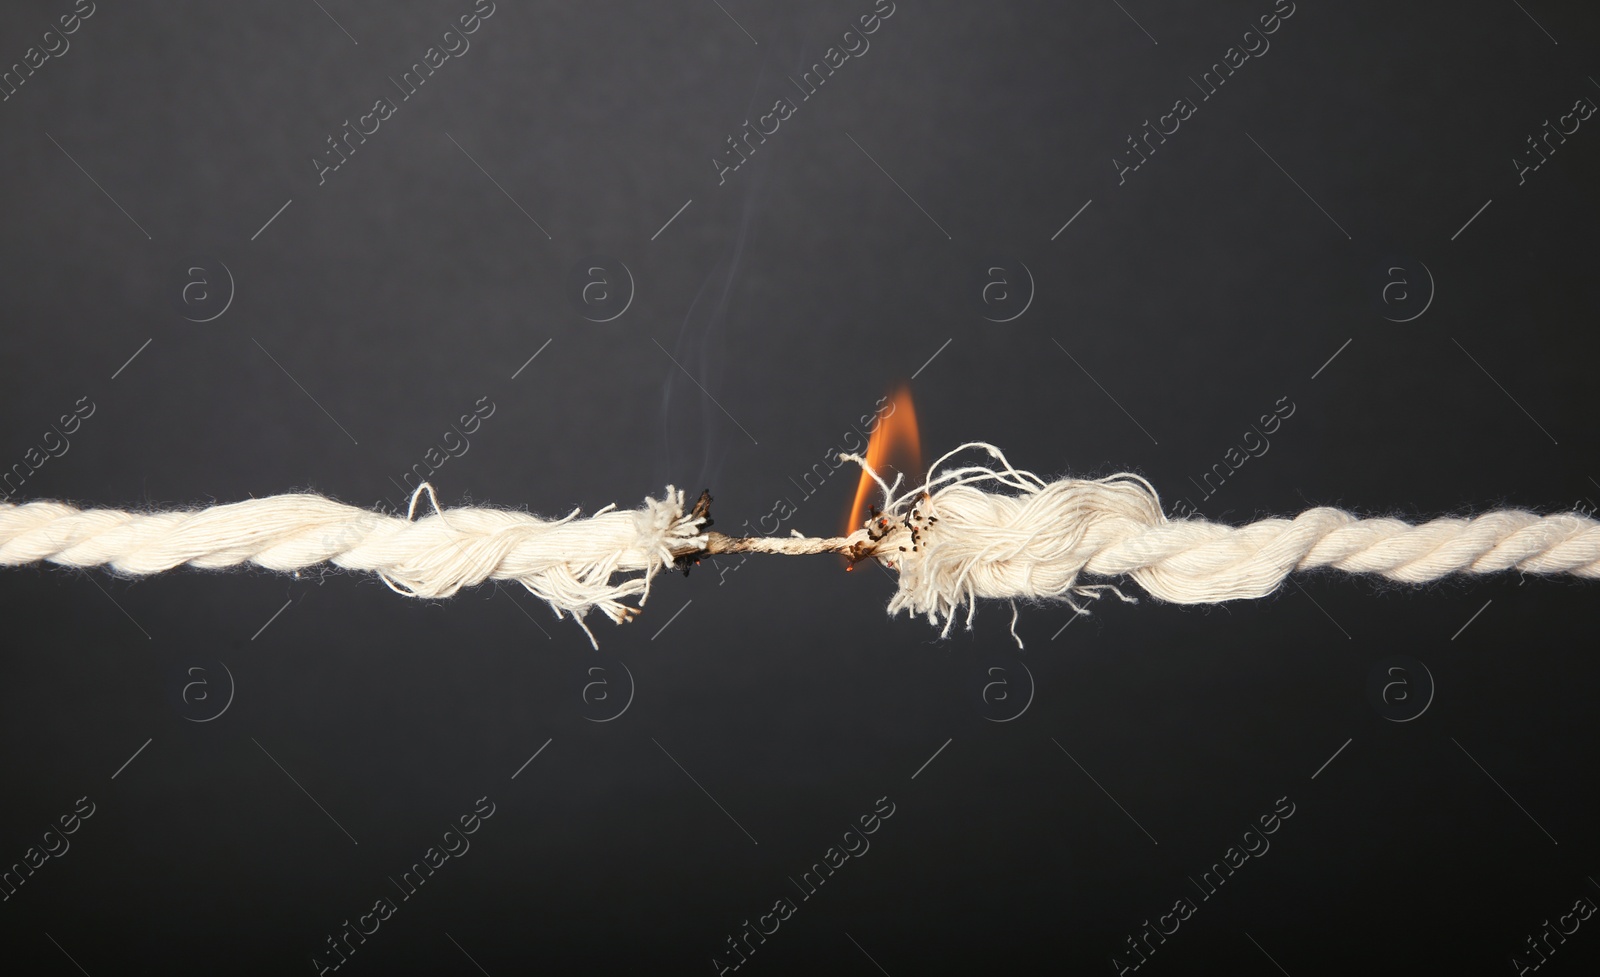 Photo of Burning frayed rope at breaking point on gray background